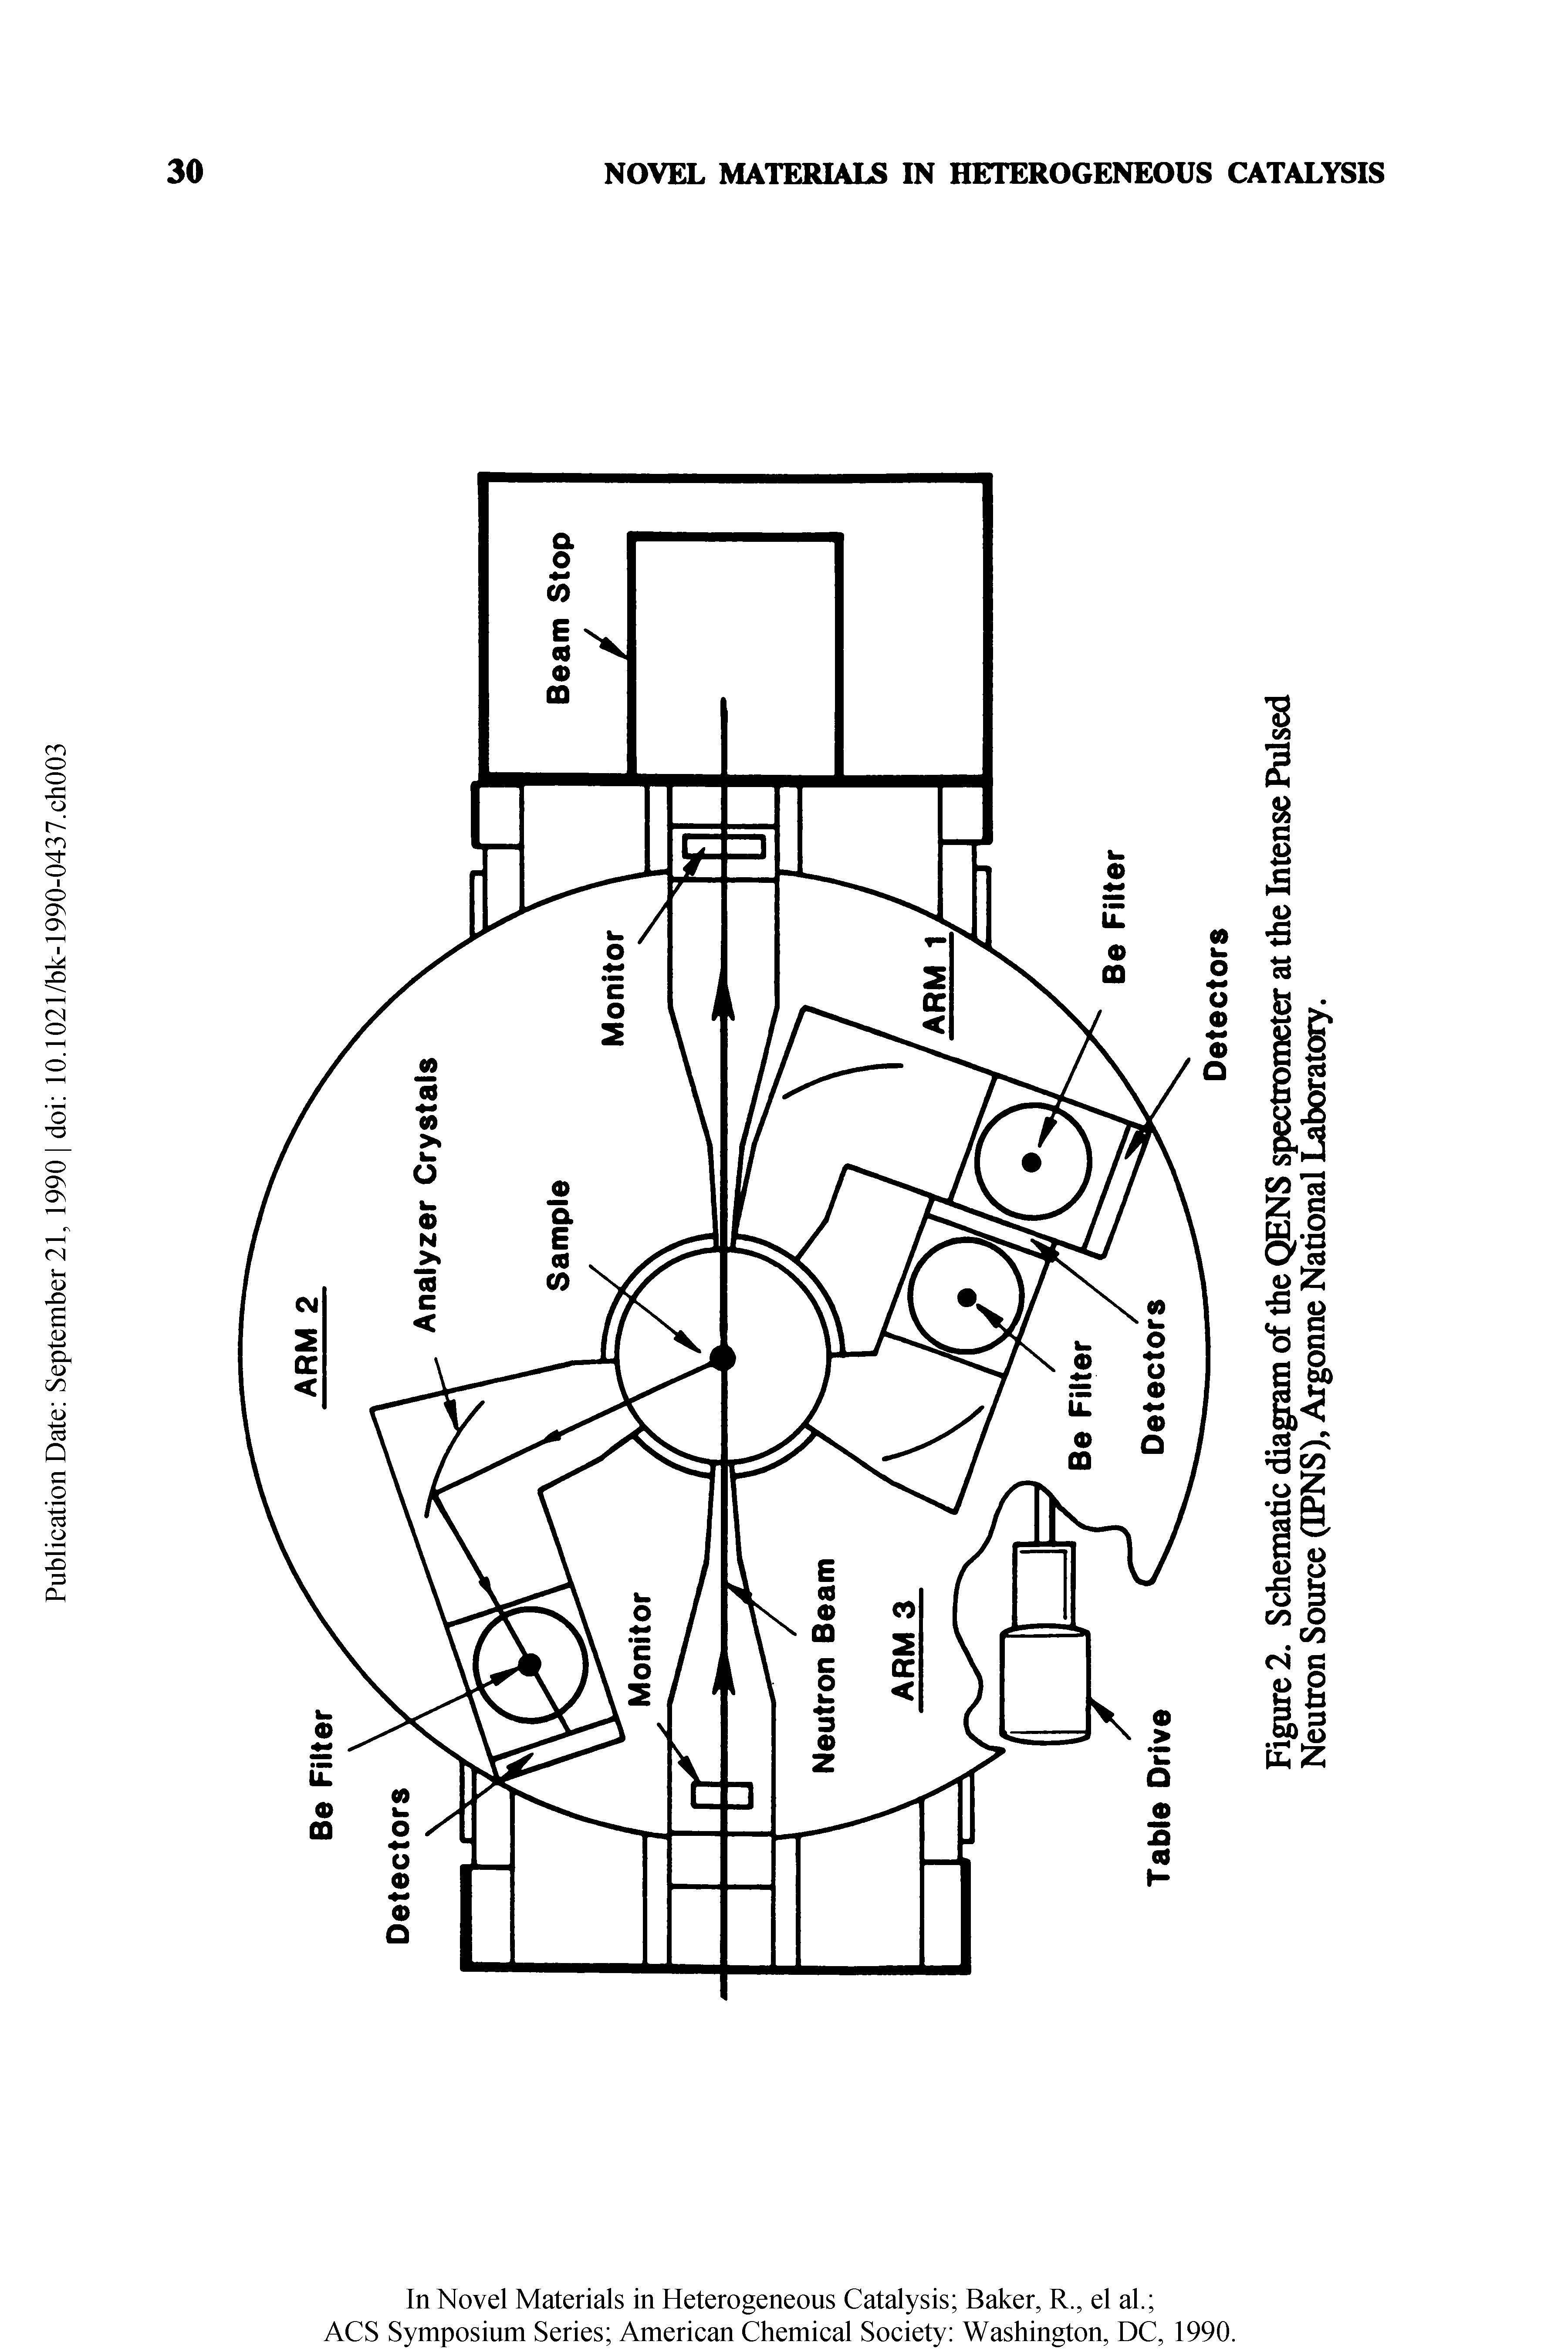 Figure 2. Schematic diagram of the QENS spectrometer at the Intense Pulsed Neutron Source (IPNS), Argonne National Laboratory.